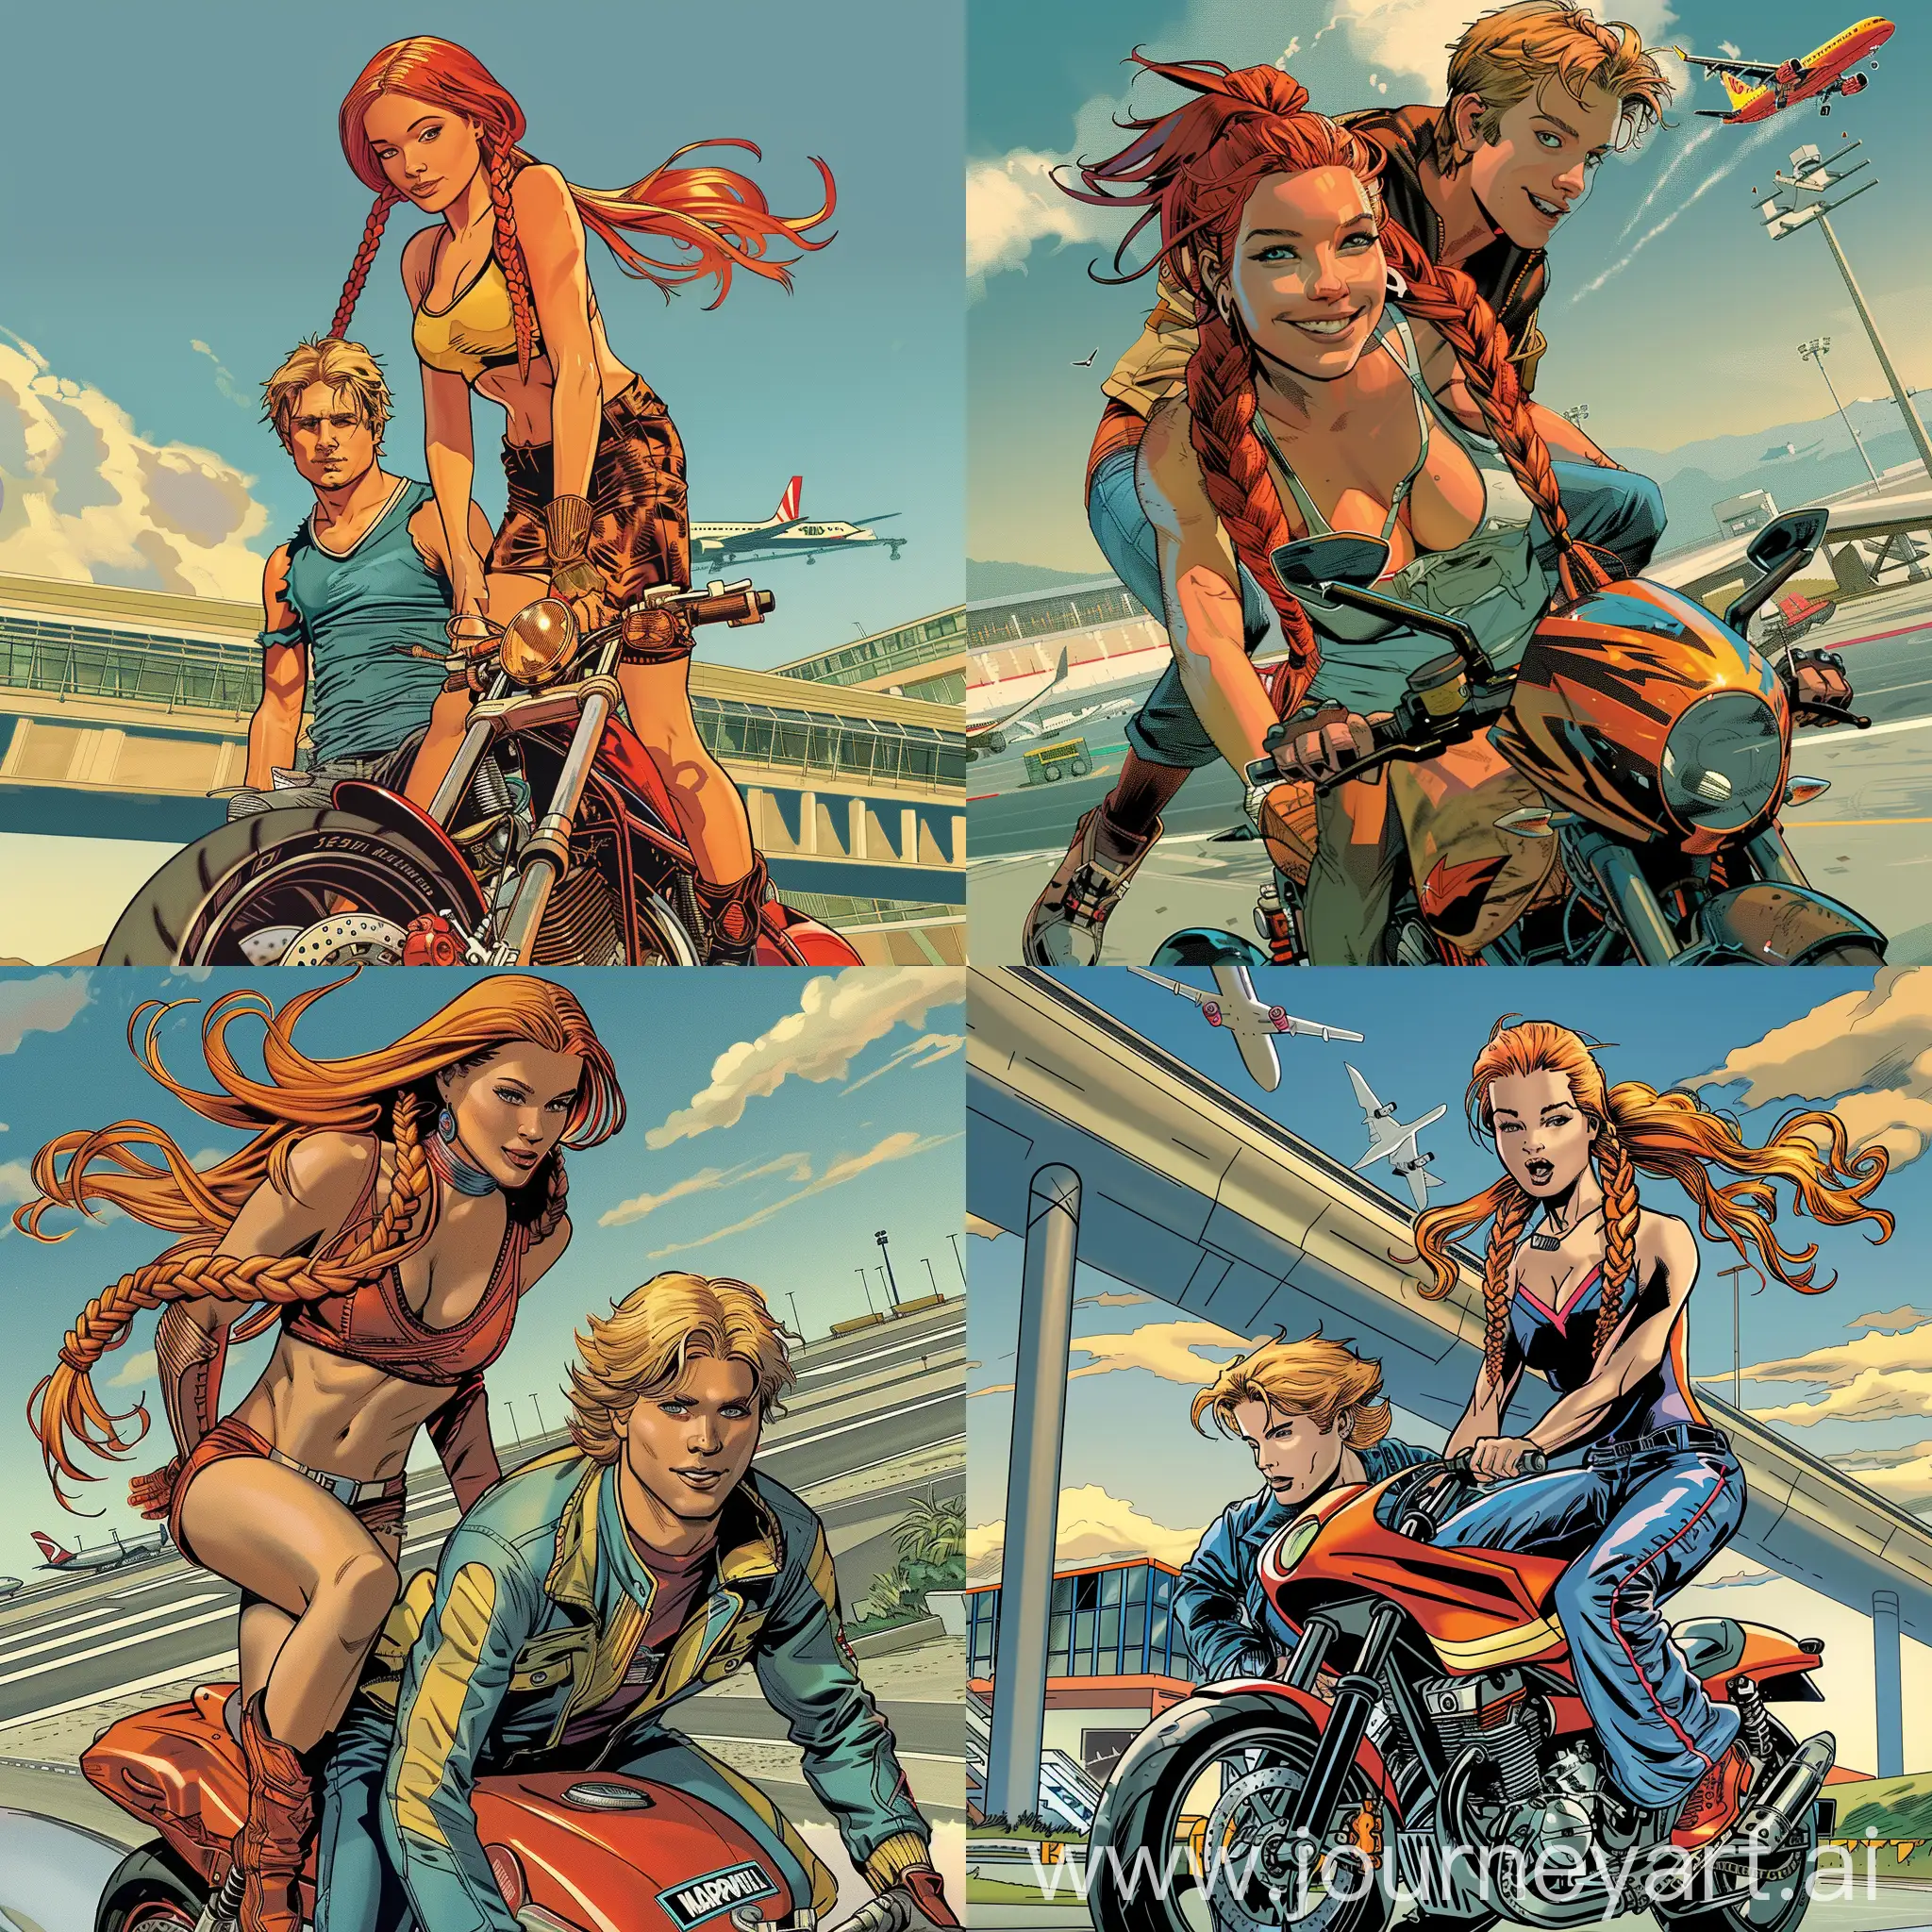 In the style of a Marvel comic, colorful and vibrant. A young 25 year old woman, attractive, with ginger hair in long double braids. Seductive outfit. She is sitting behined 25 year old young man with blonde hair while riding a fast motorcycle. they are in the middle of doing a wicked backflip off a ramp over an airport